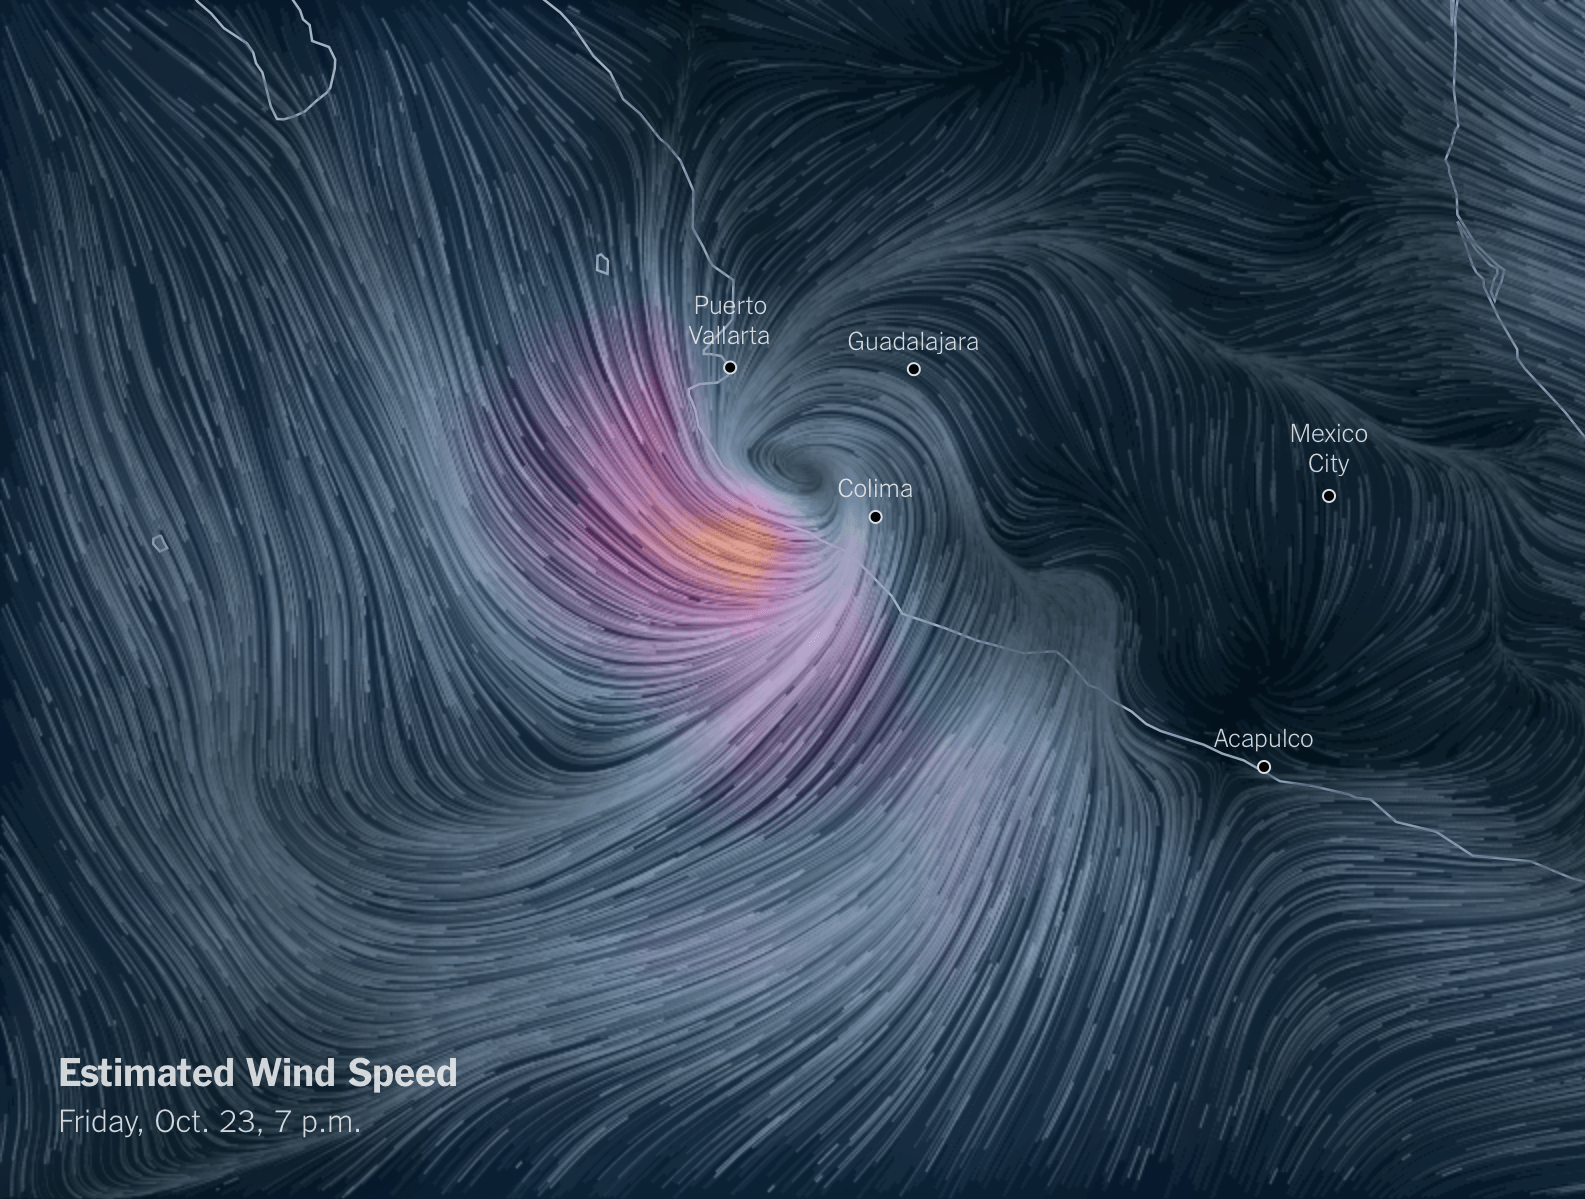 Wind Speed Map of Hurricane Patricia